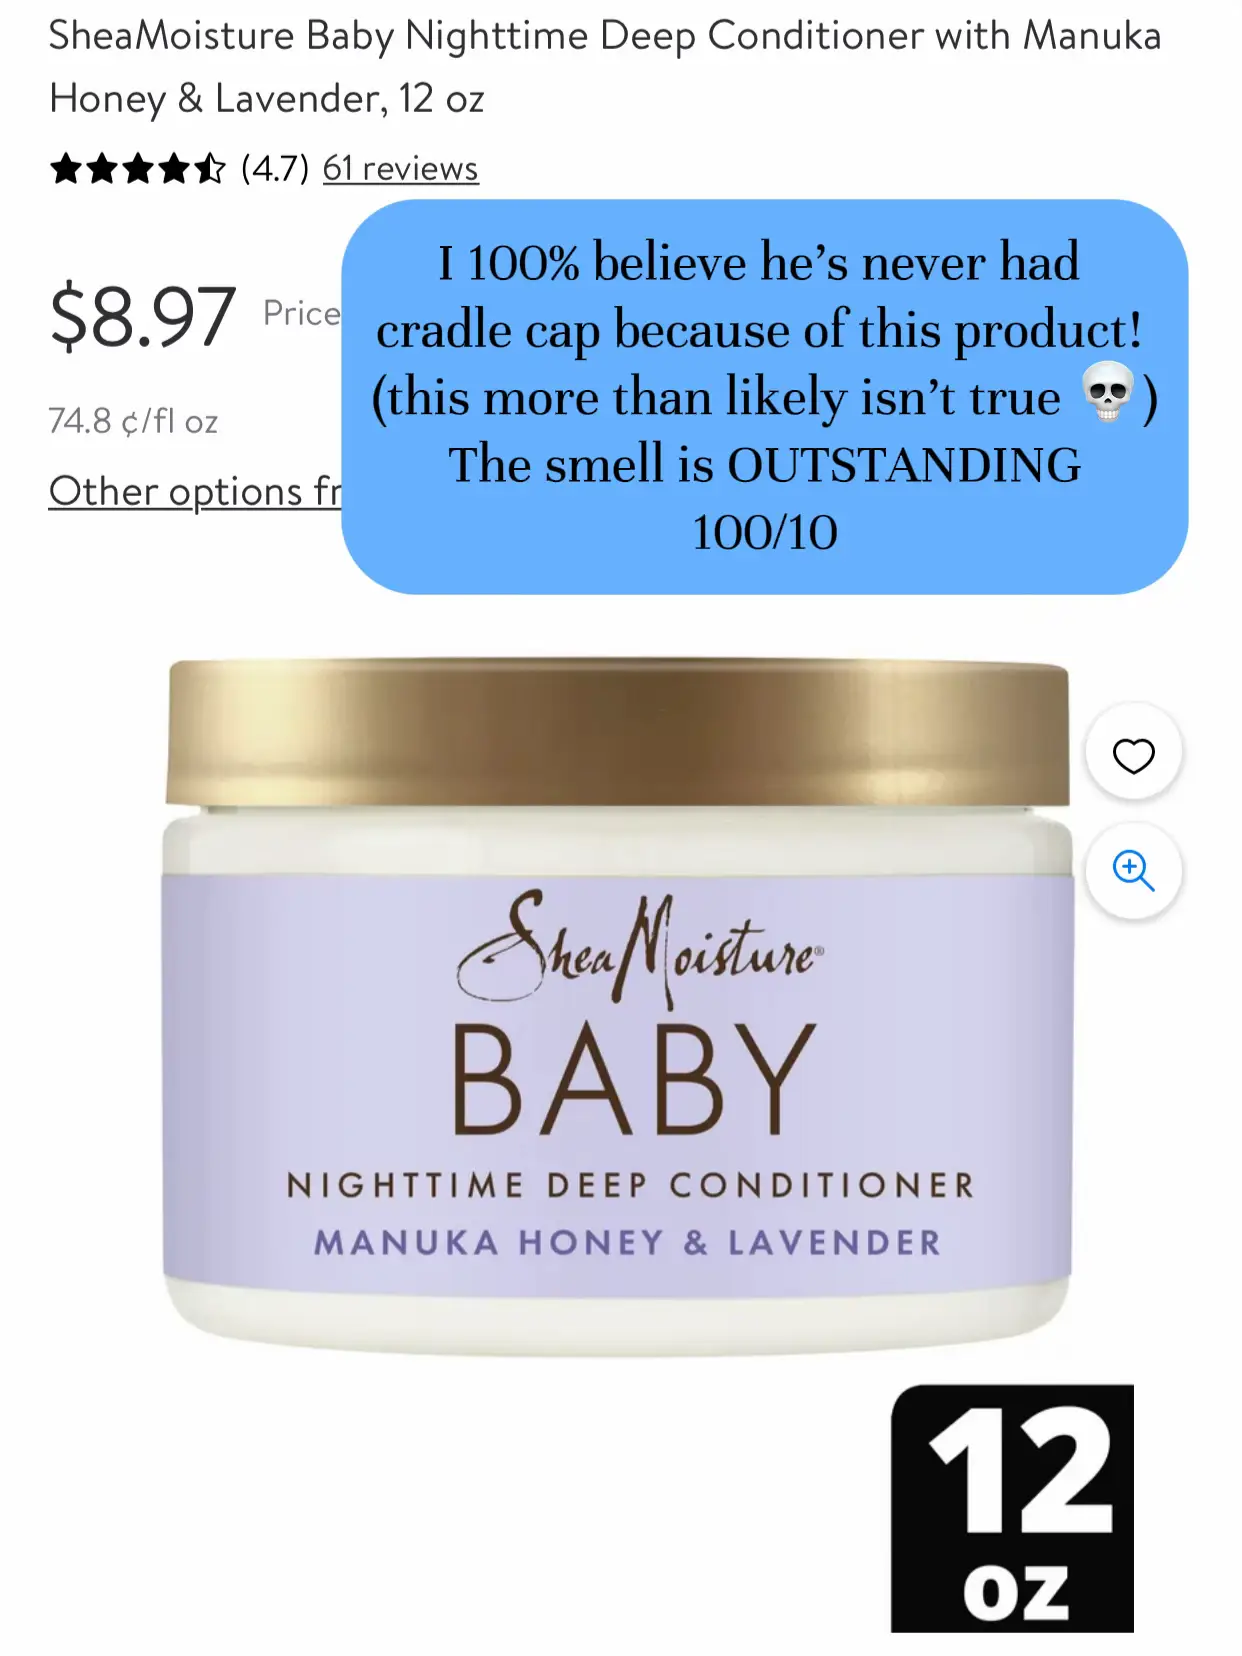  A bottle of Shea Moisture Baby Nighttime Deep Conditioner with Manuka Honey & Lavender.